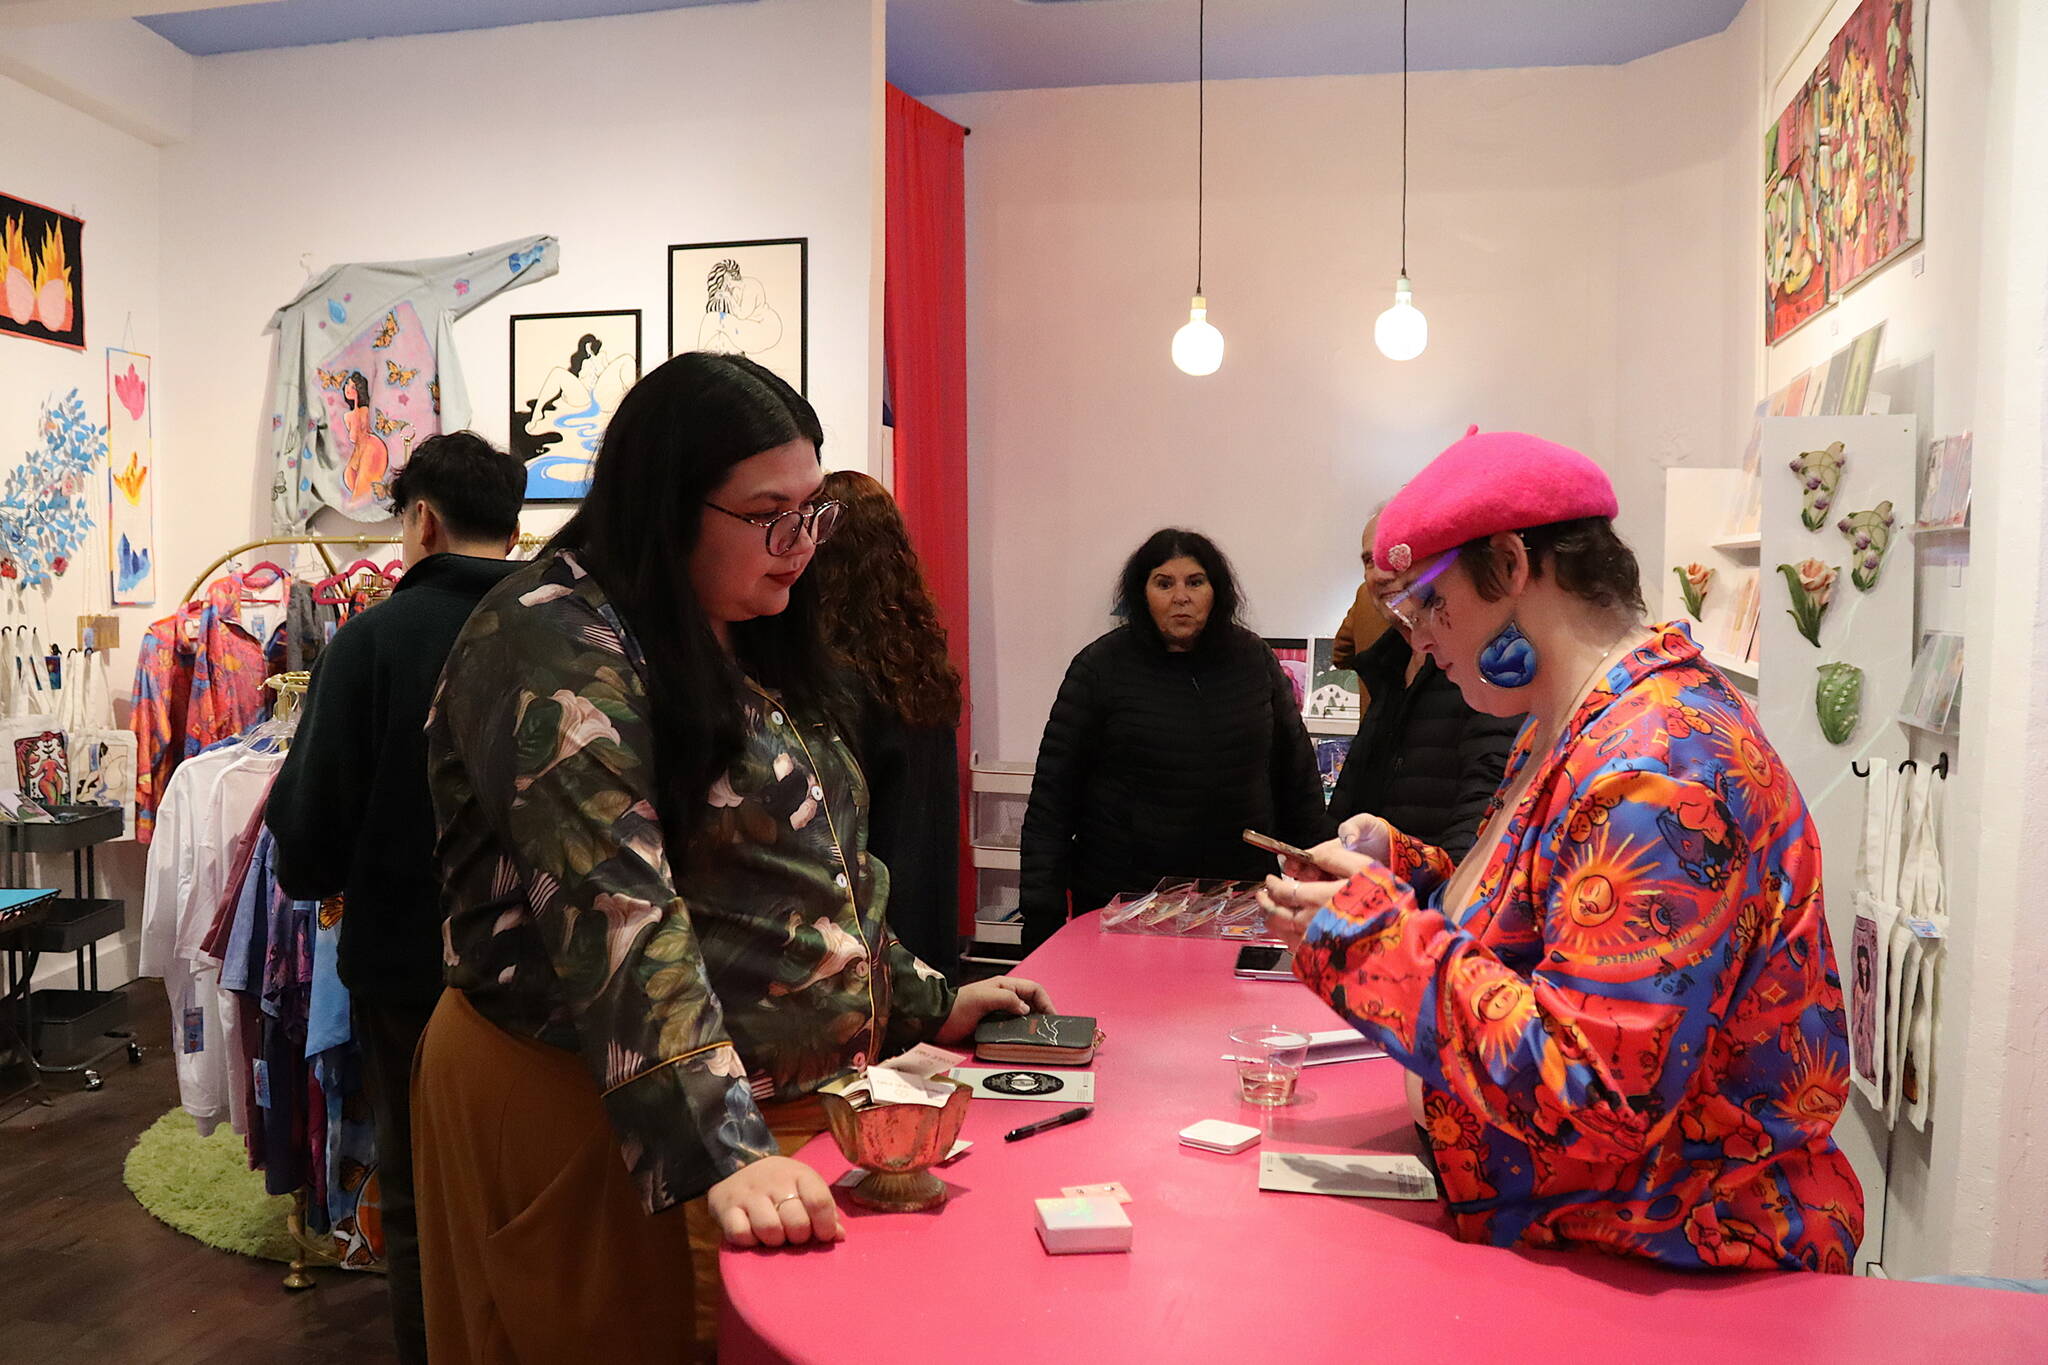 Stephanie Tripp (left) an employee at two downtown gift shops, takes a quick break to make a purchase at the newly opened Drip Drop Wonder Shop operated by artist Natalie Weinberg during Gallery Walk on Friday night. (Mark Sabbatini / Juneau Empire)